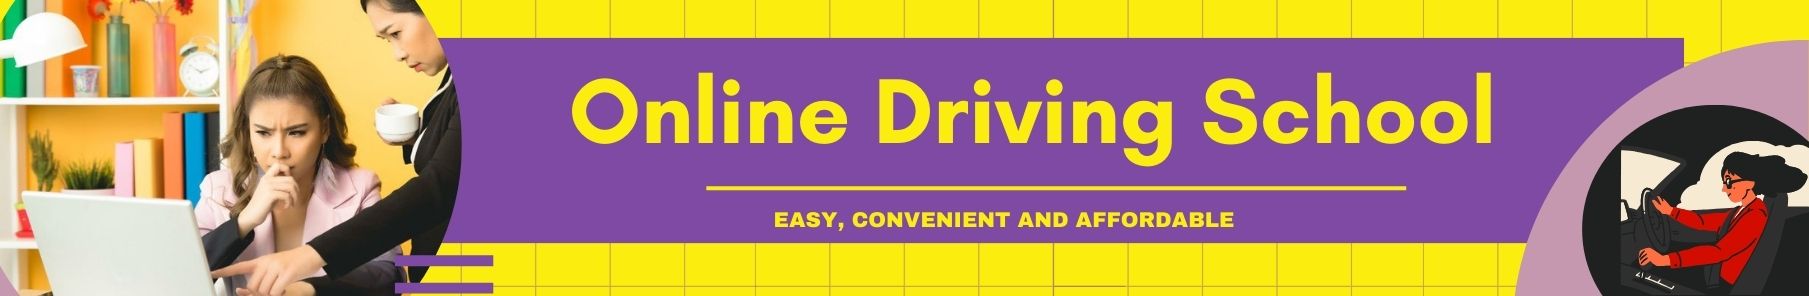 Ready to Get Your Driver's License? Enroll in Our Online Driving Courses at Driving School Irving Today!